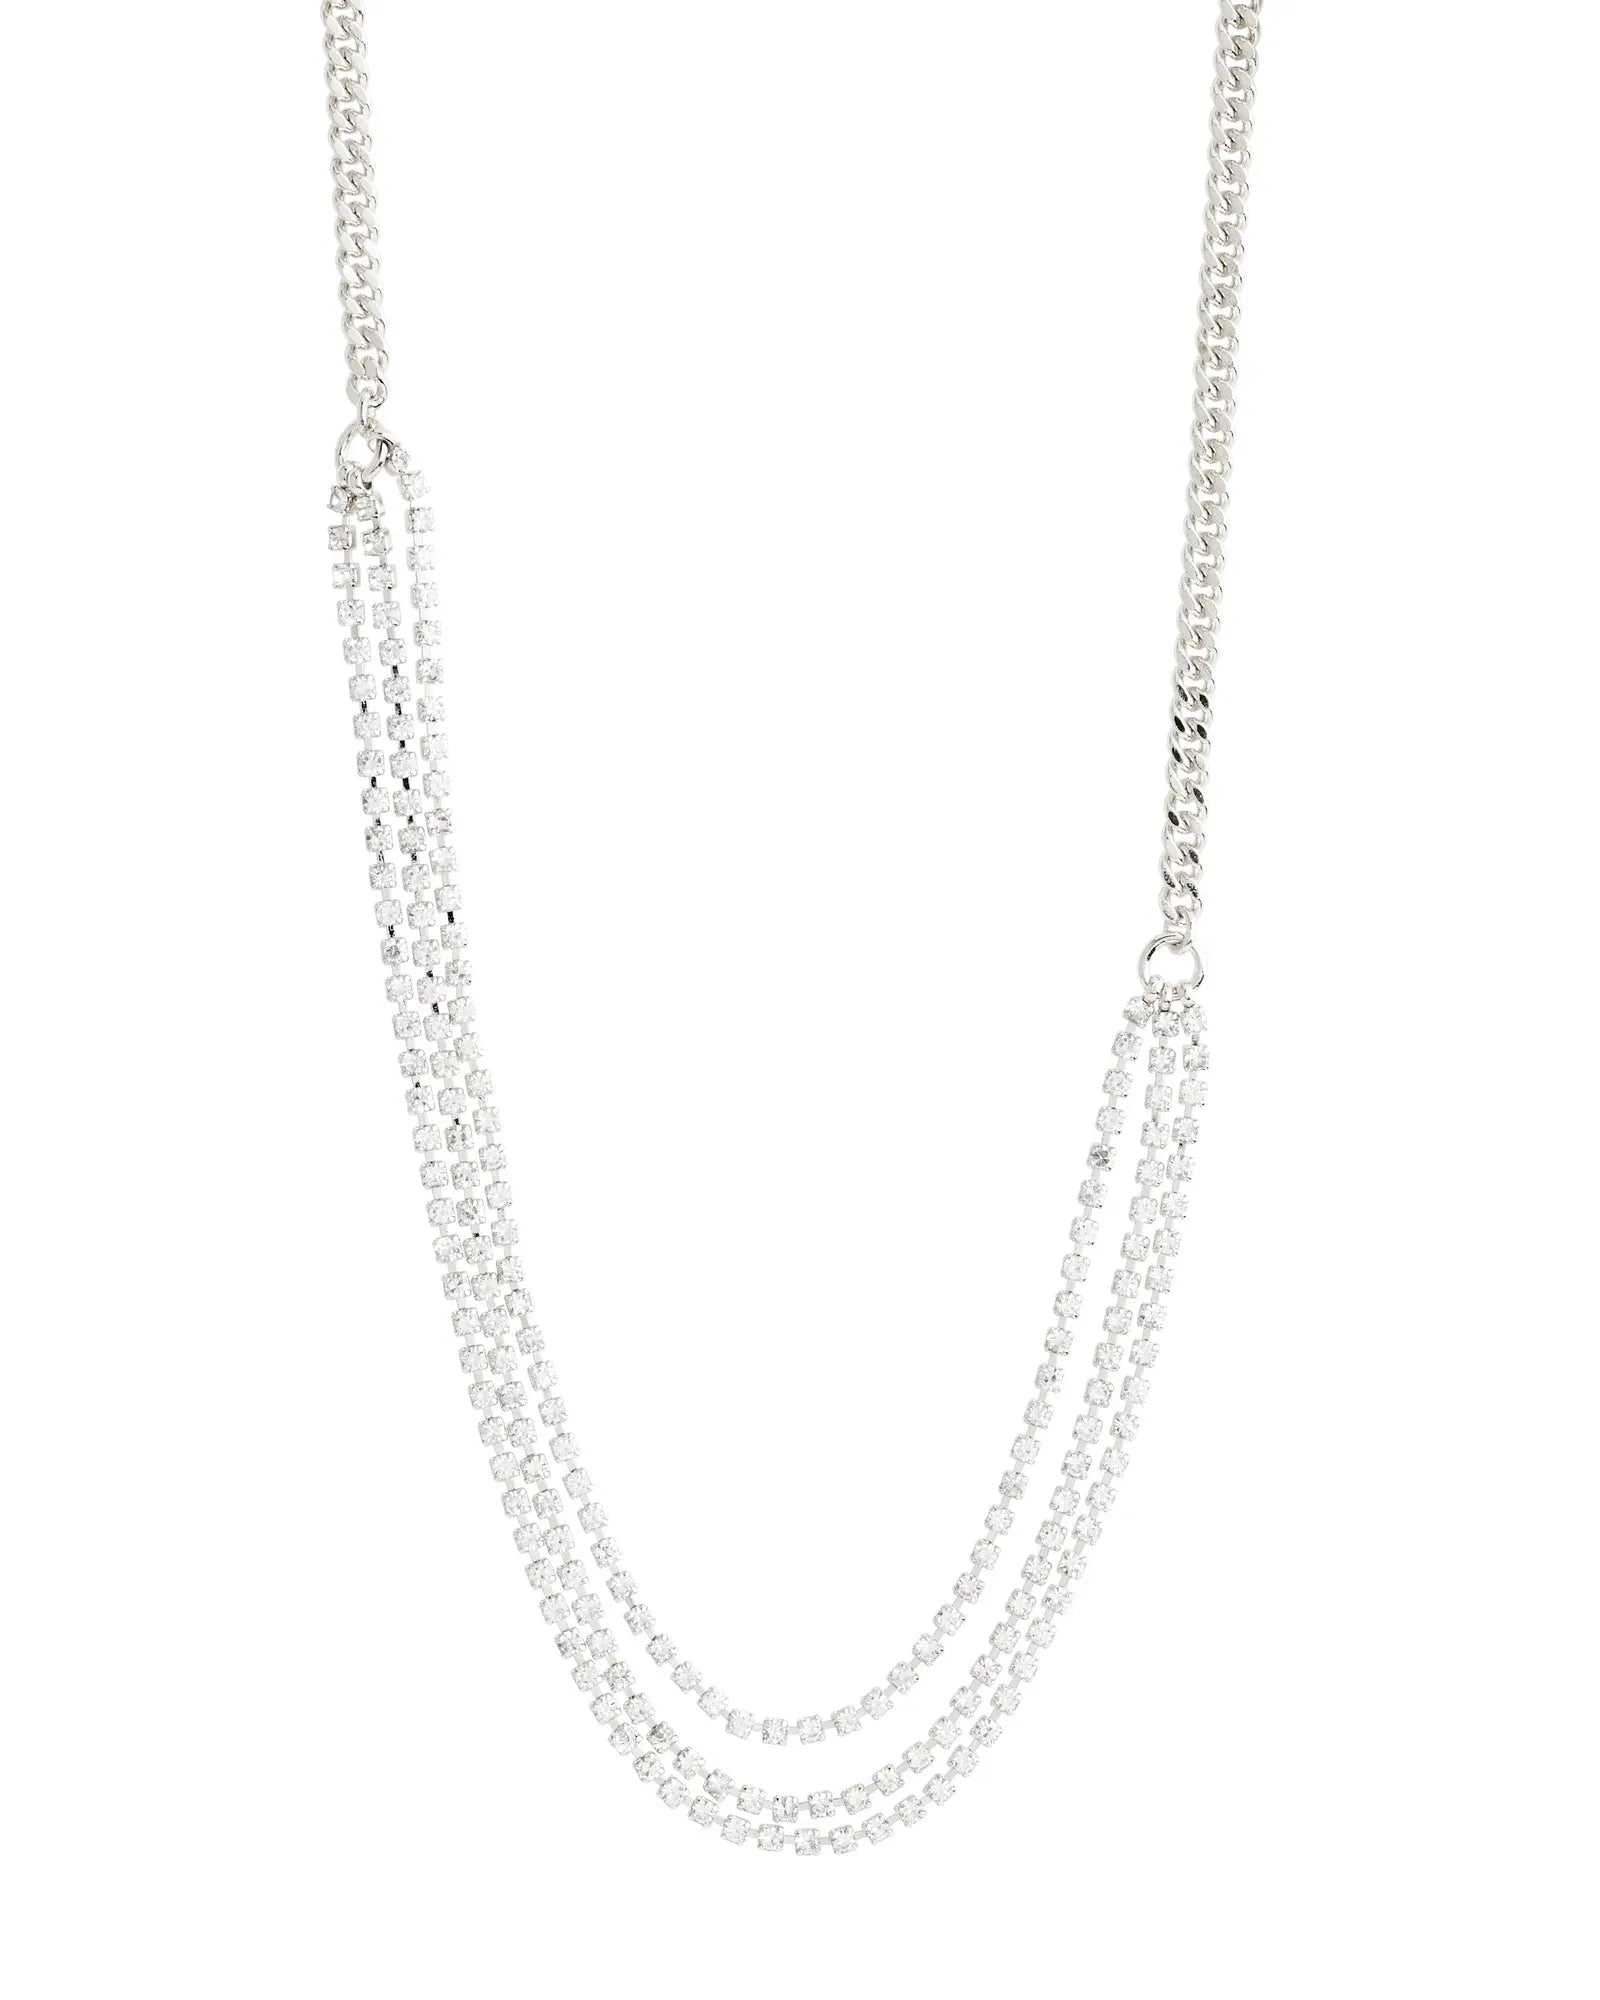 Blink Crystal Necklace - Silver Plated